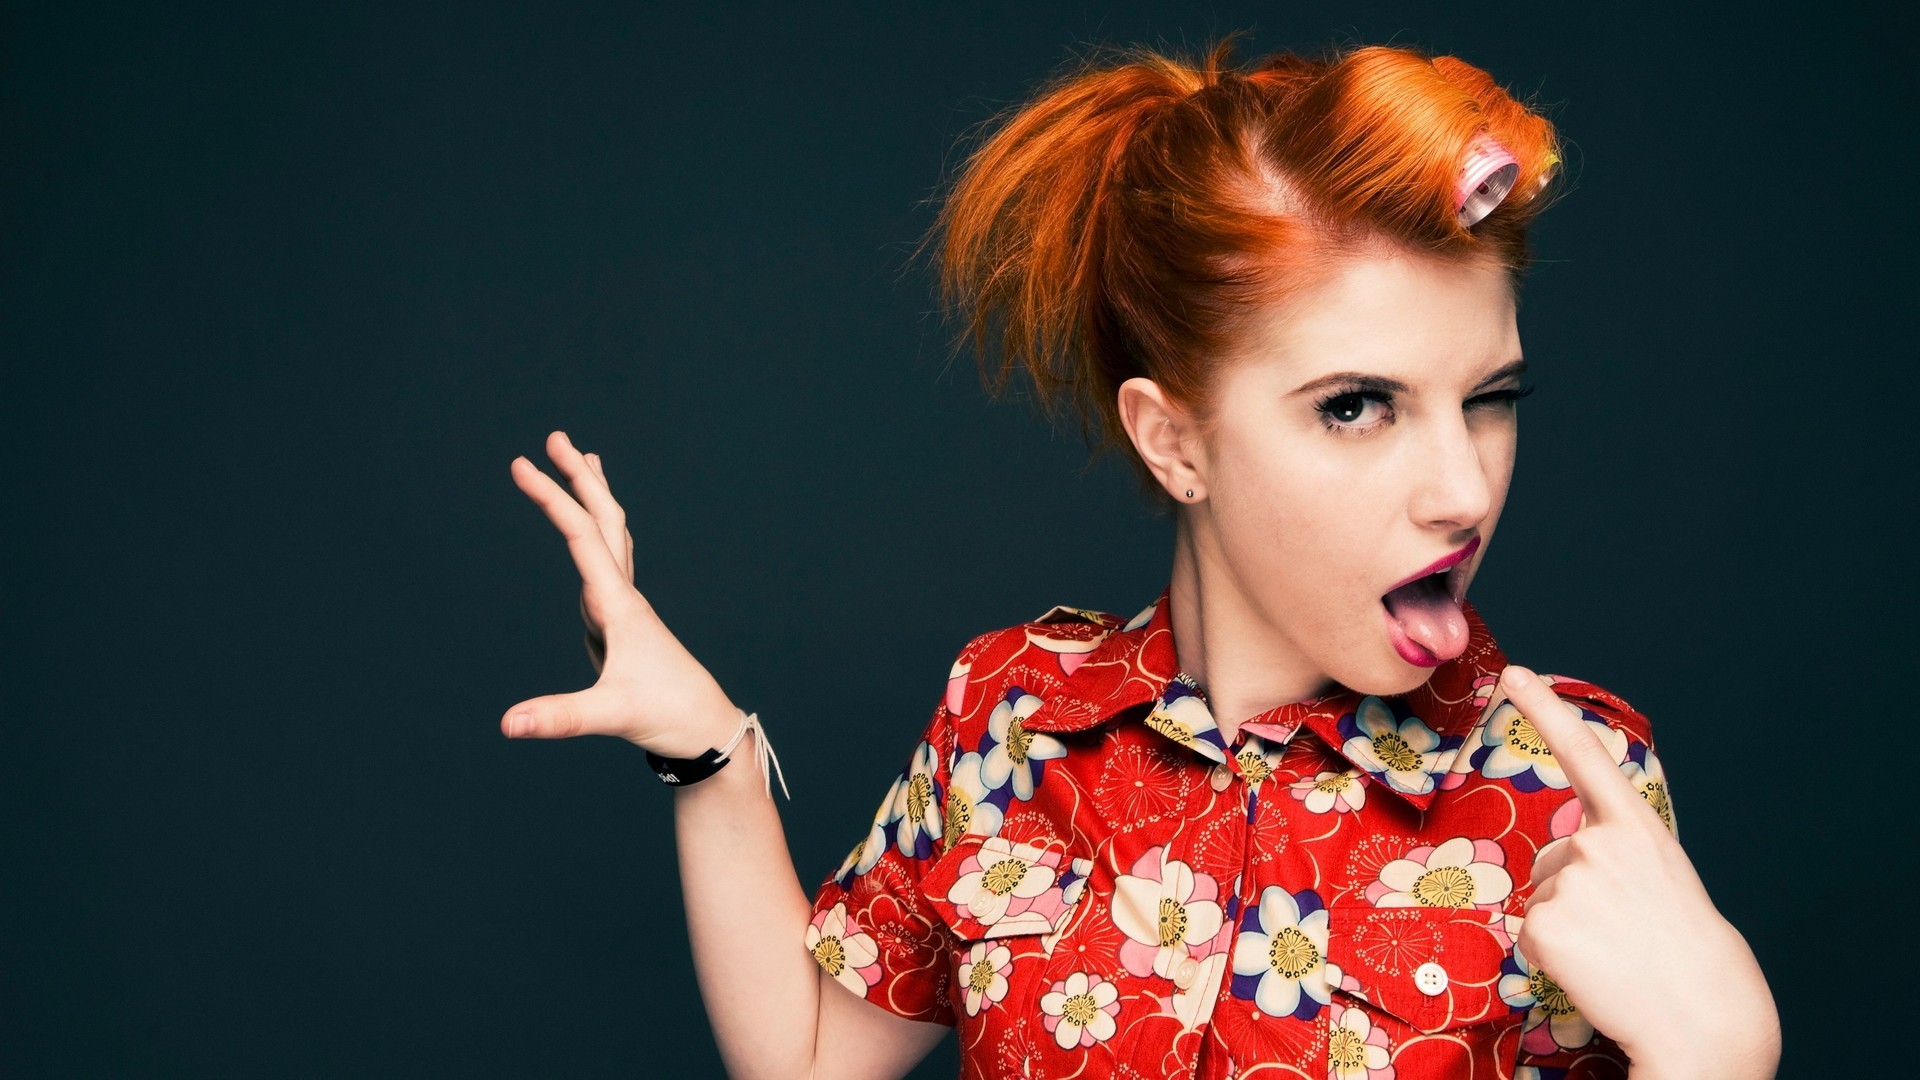 black, White, People, Concert, Women, Paramore, Hayley, Williams, Singer, Redheads, Babes, Females, Microphone Wallpaper